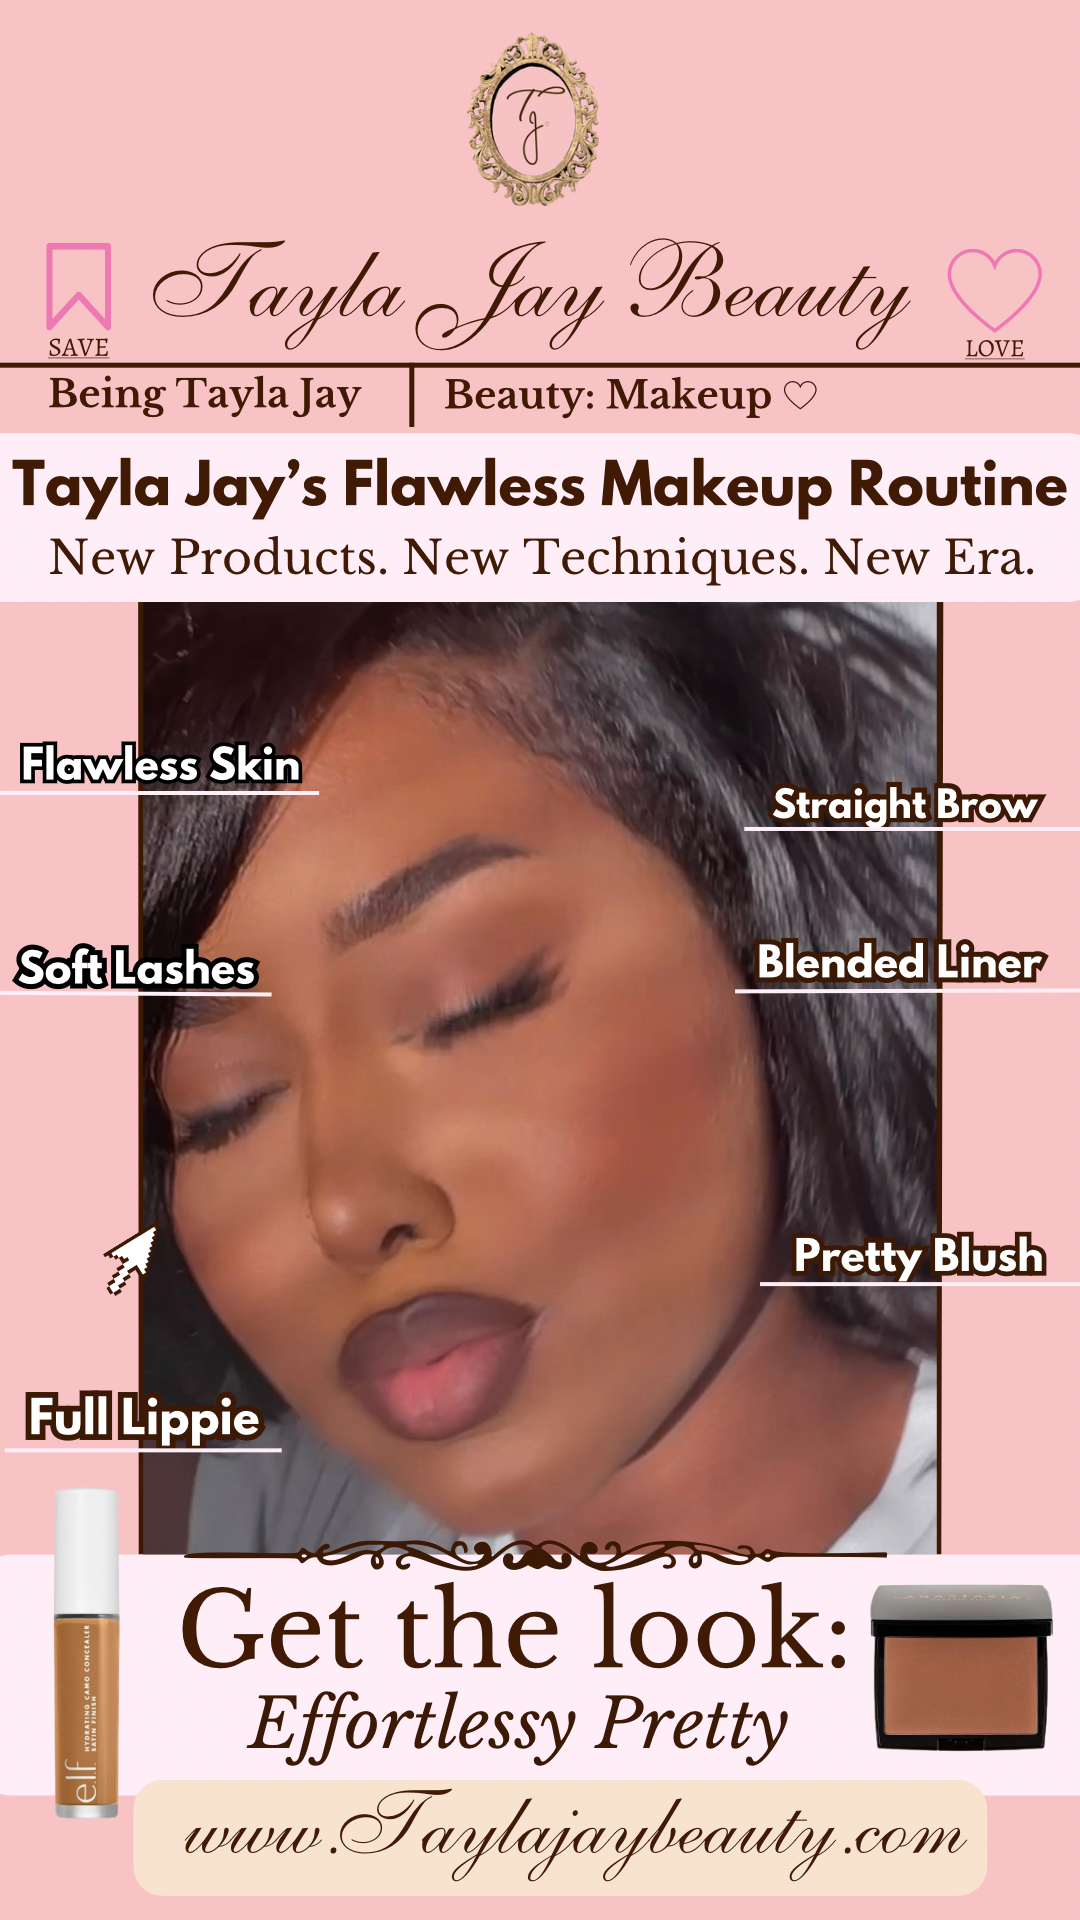 How to Get Tayla’s Flawless Makeup Look